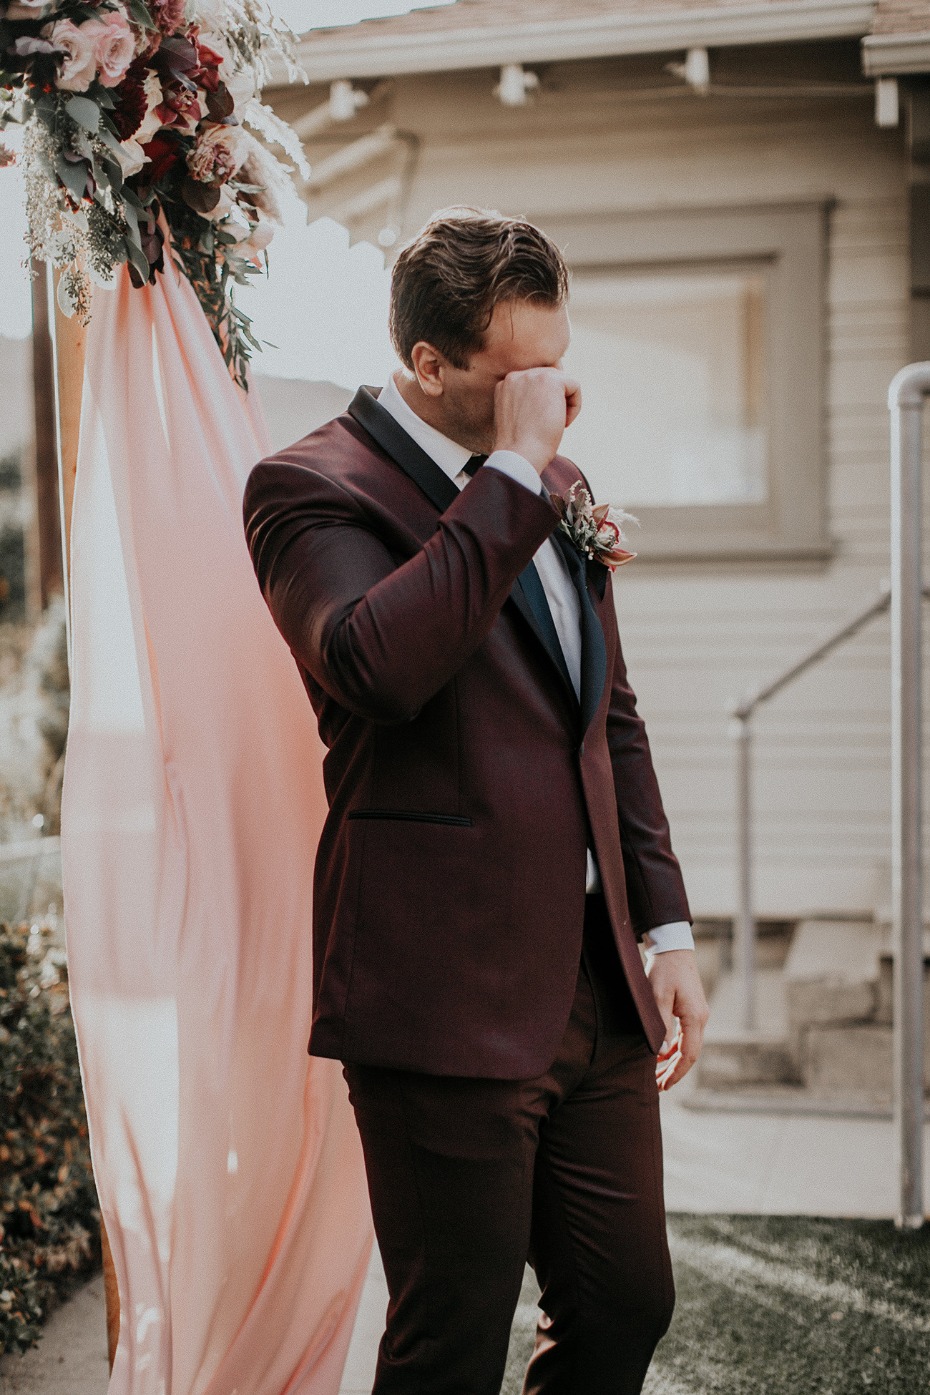 Burgundy and black suit